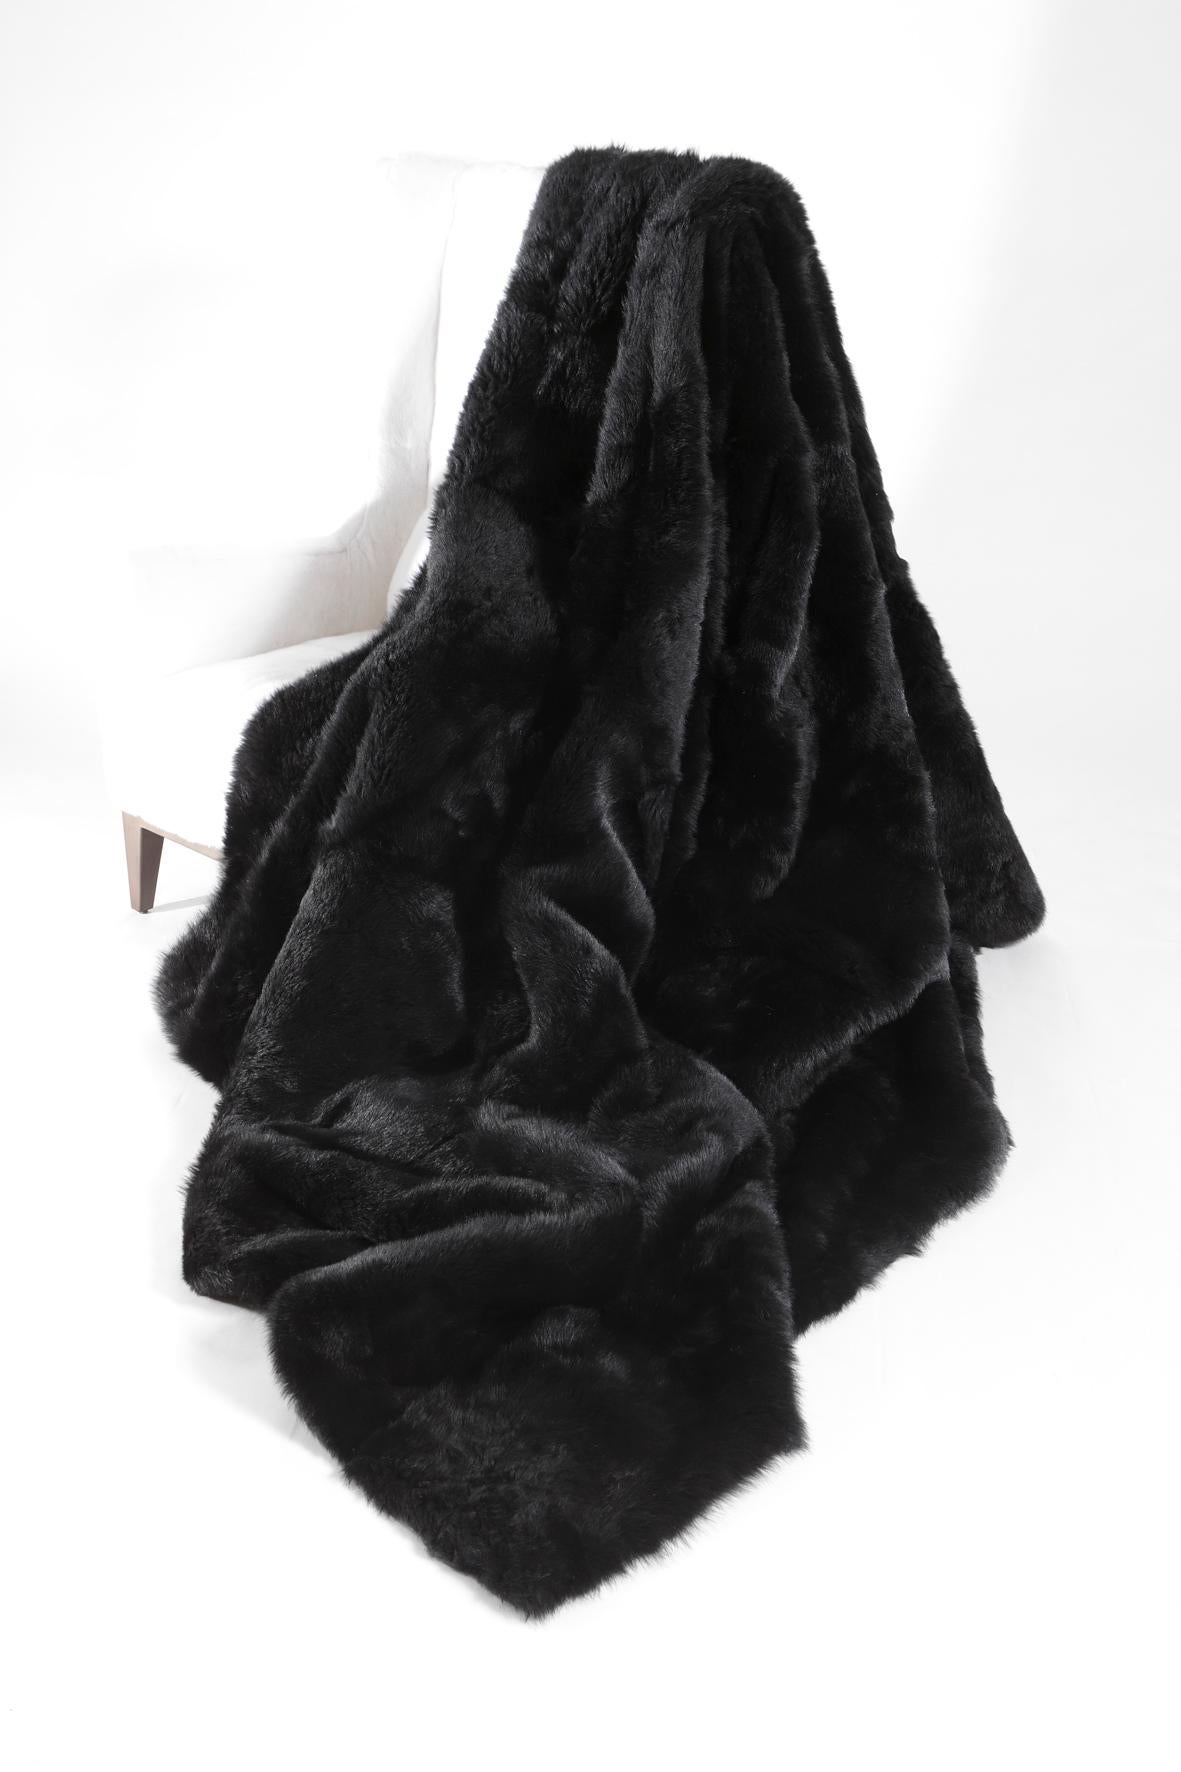 Fur throw
Dyed Tuscany lambskin
Cashmere and wool lining.
 